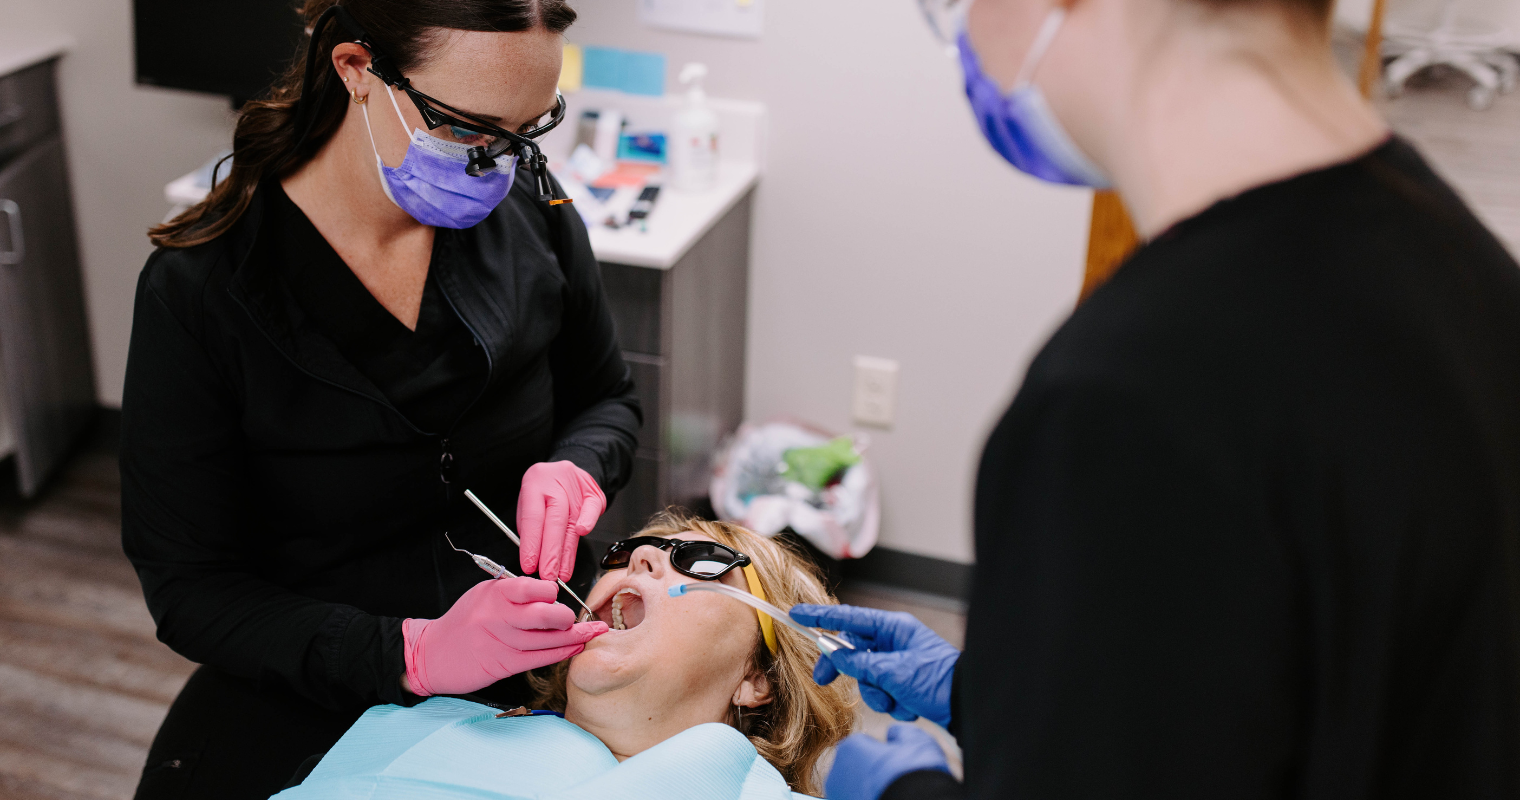 A patient is receiving treatment for tooth decay